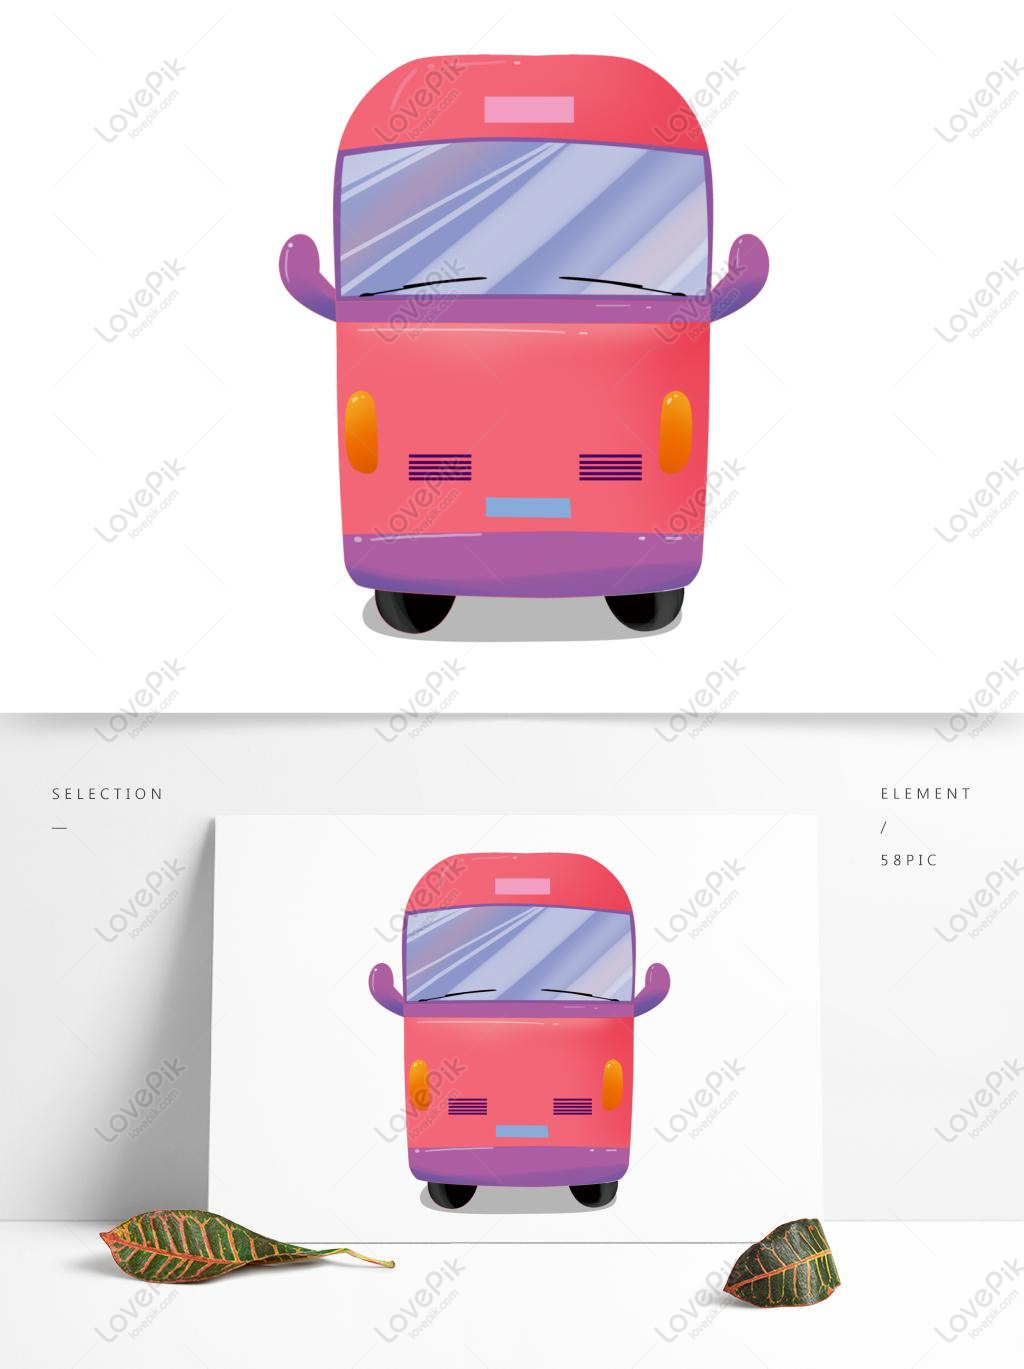 Cartoon A Bus Front Design Psd Images Free Download 1369 1024 Px Lovepik